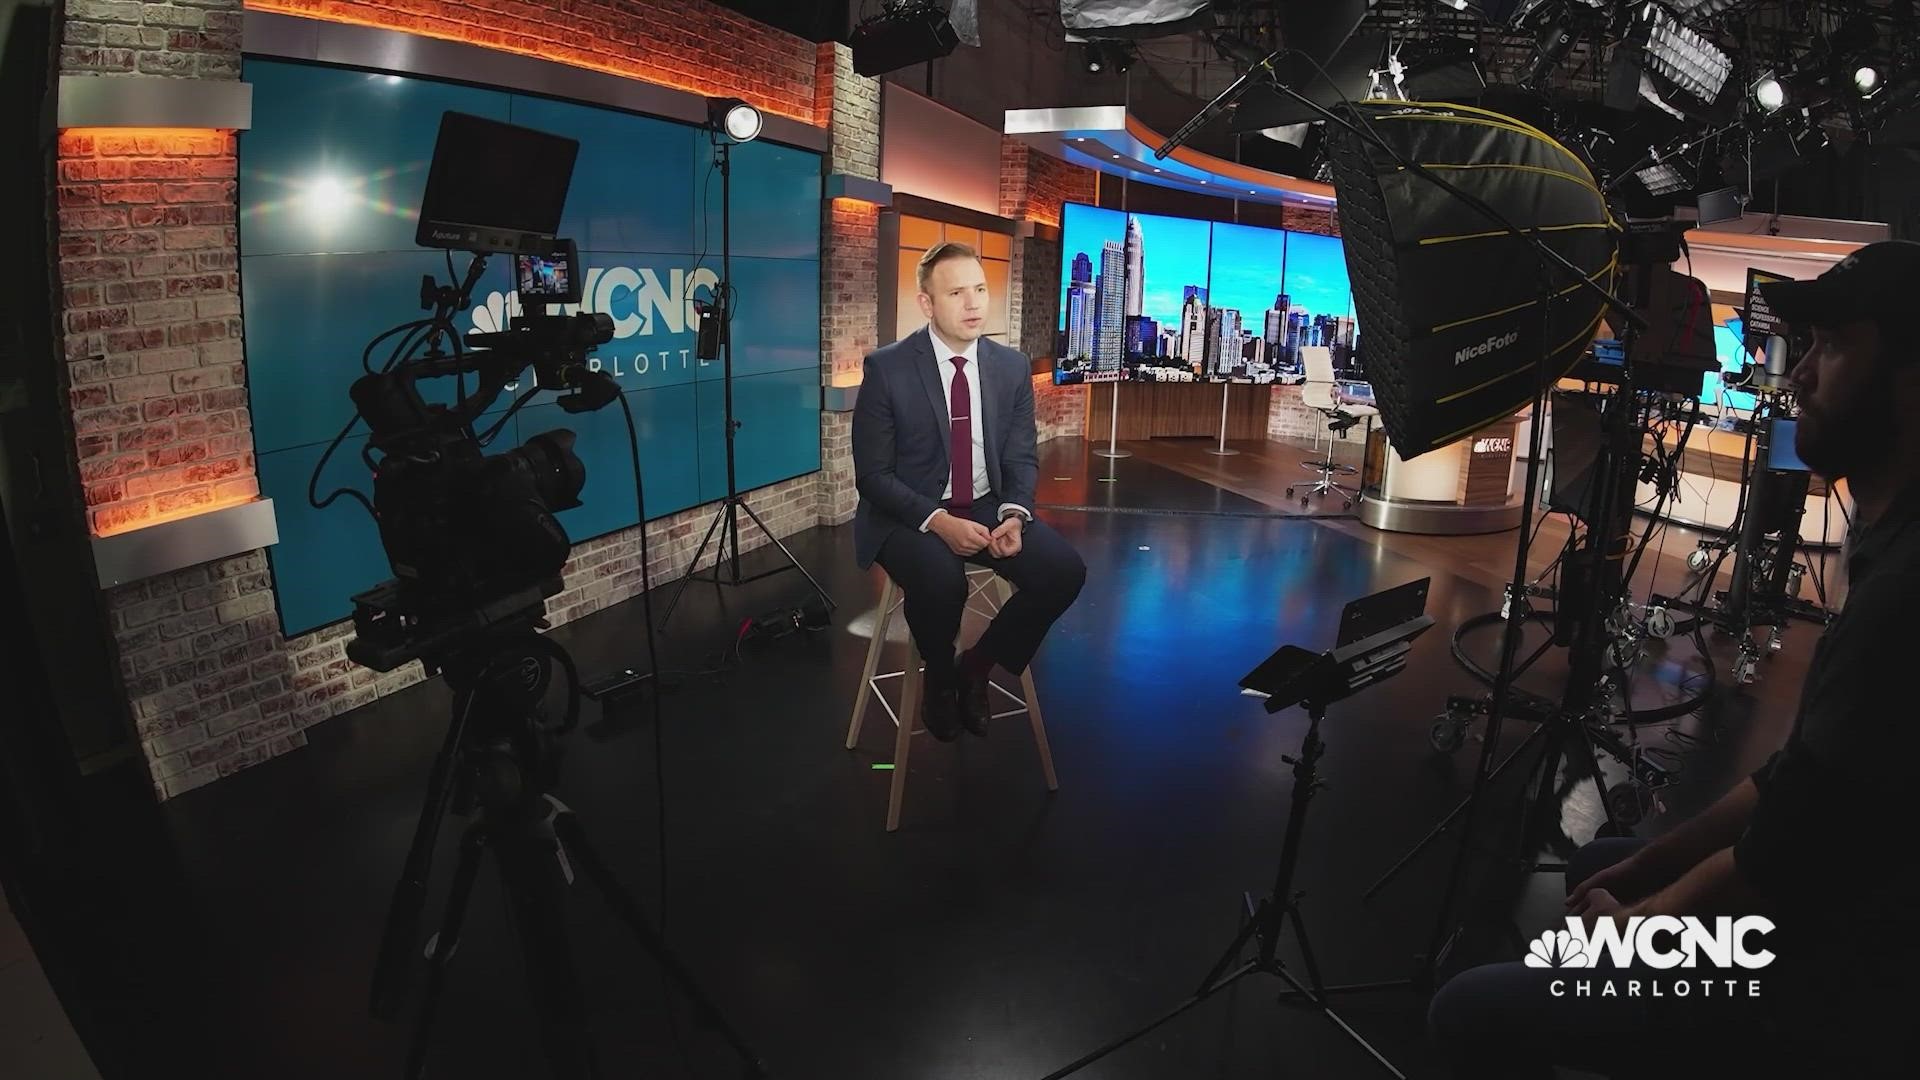 WCNC Charlotte admits the news can be really complicated and confusing, so that's why he's helping to connect the dots of some of the biggest issues and policies.